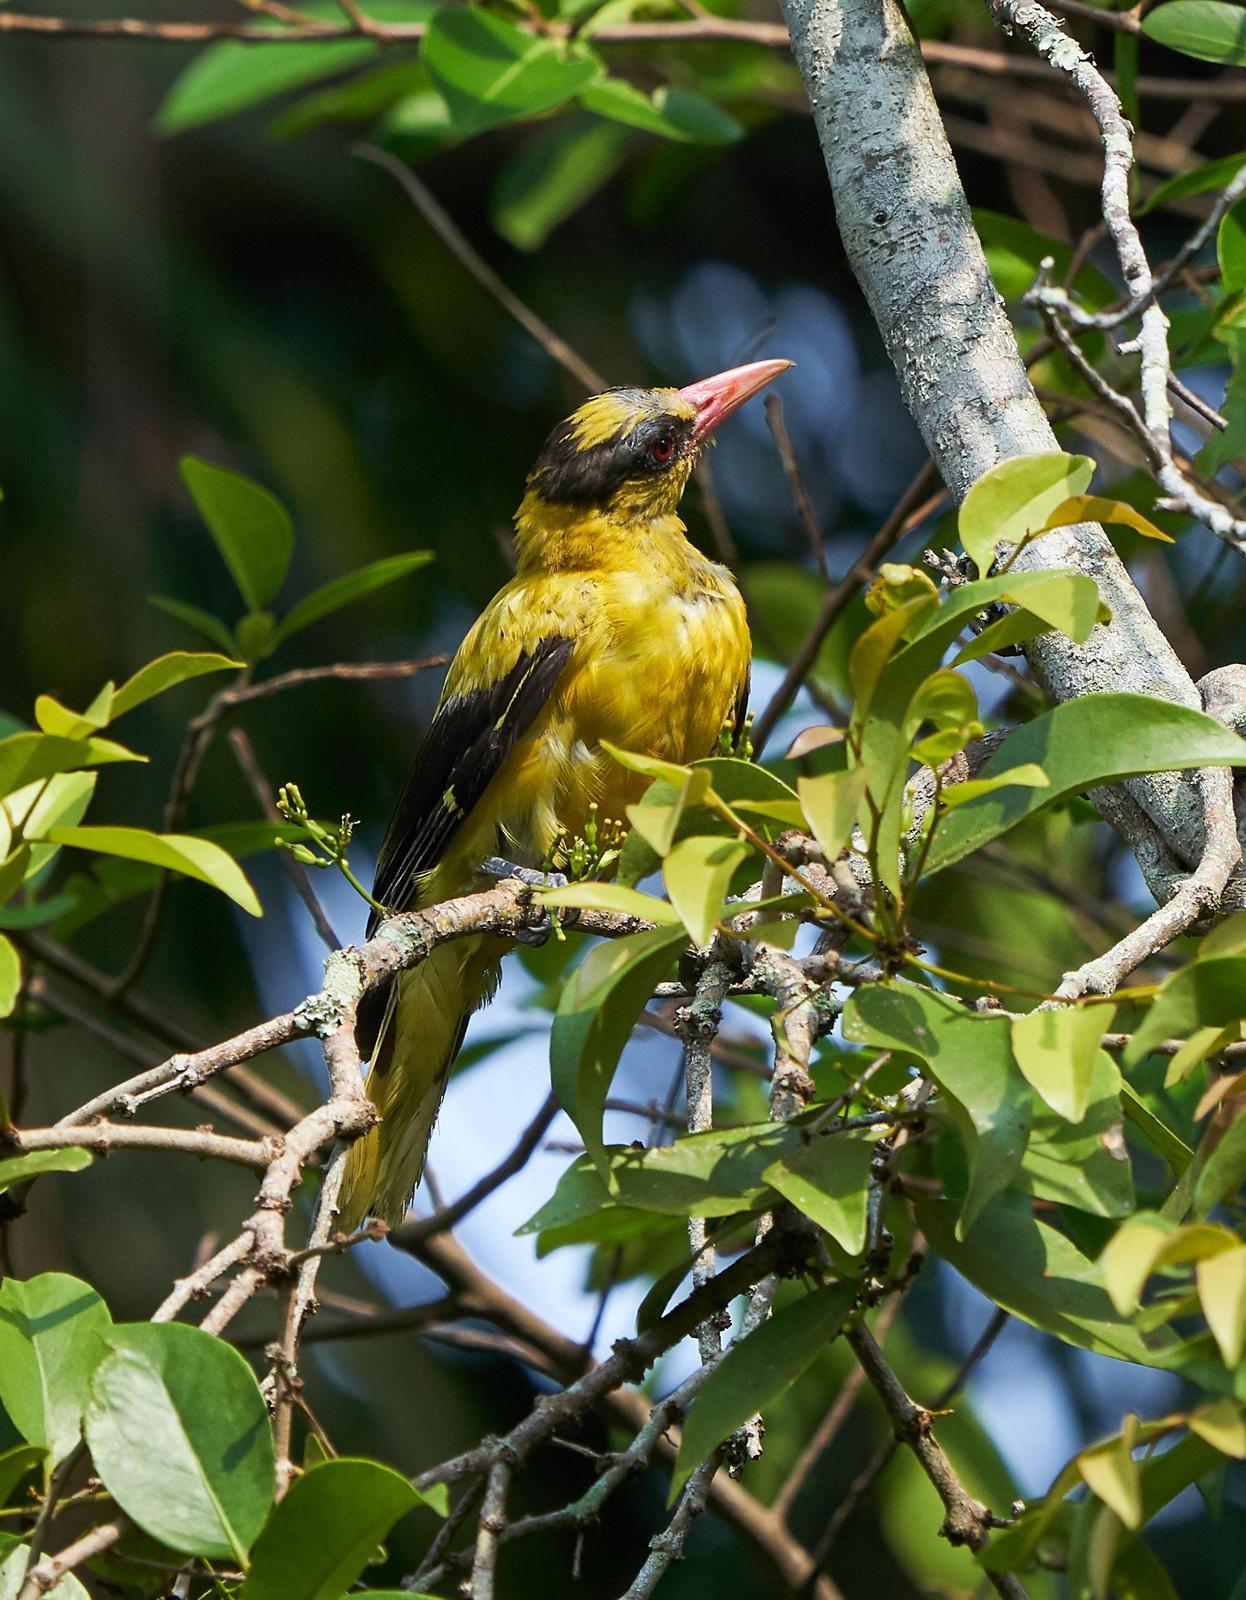 Black-naped Oriole Photo by Steven Cheong